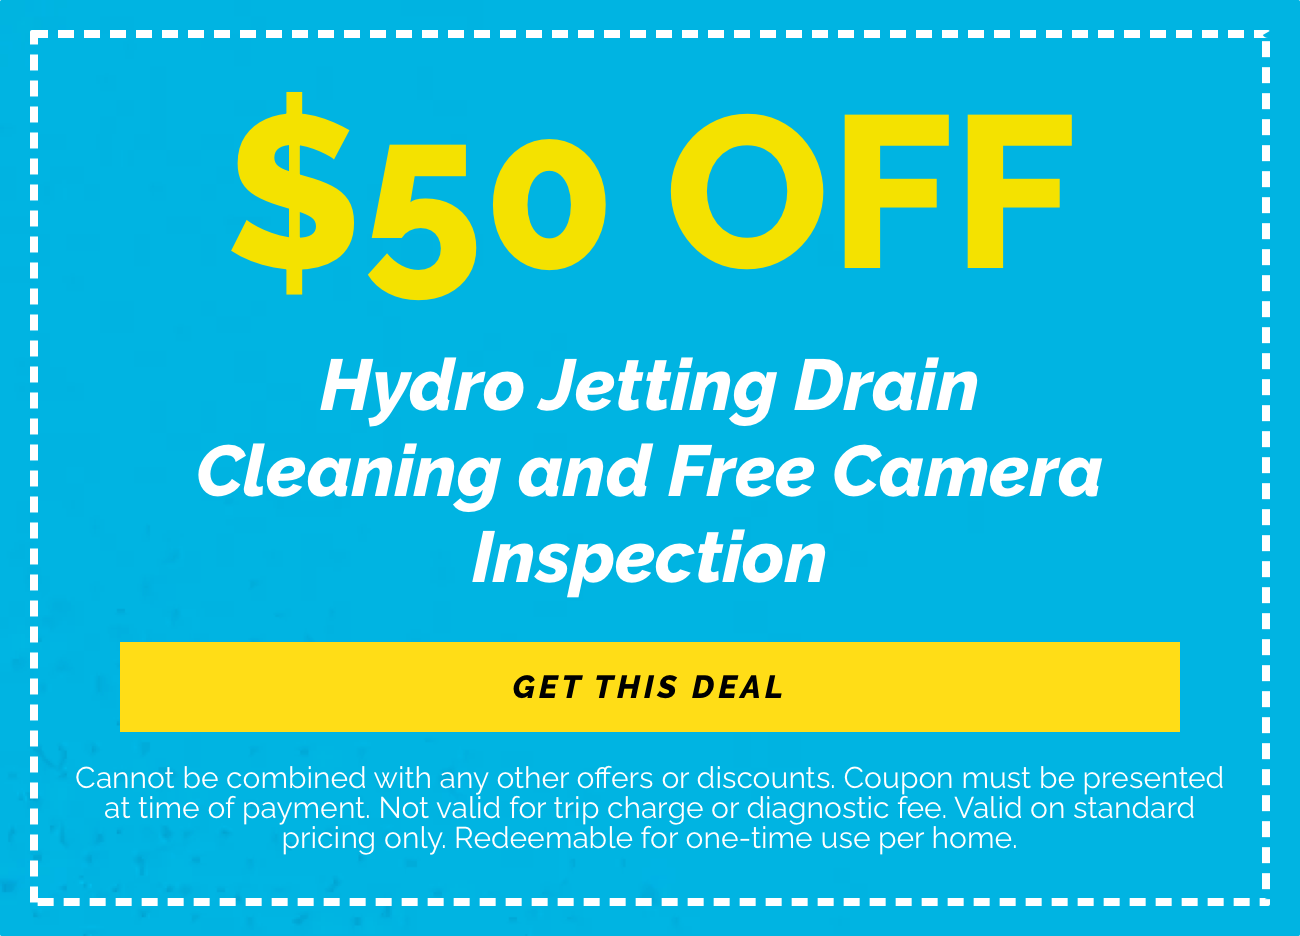 Hydro Jetting Drain Cleaning and Free Camera Inspection